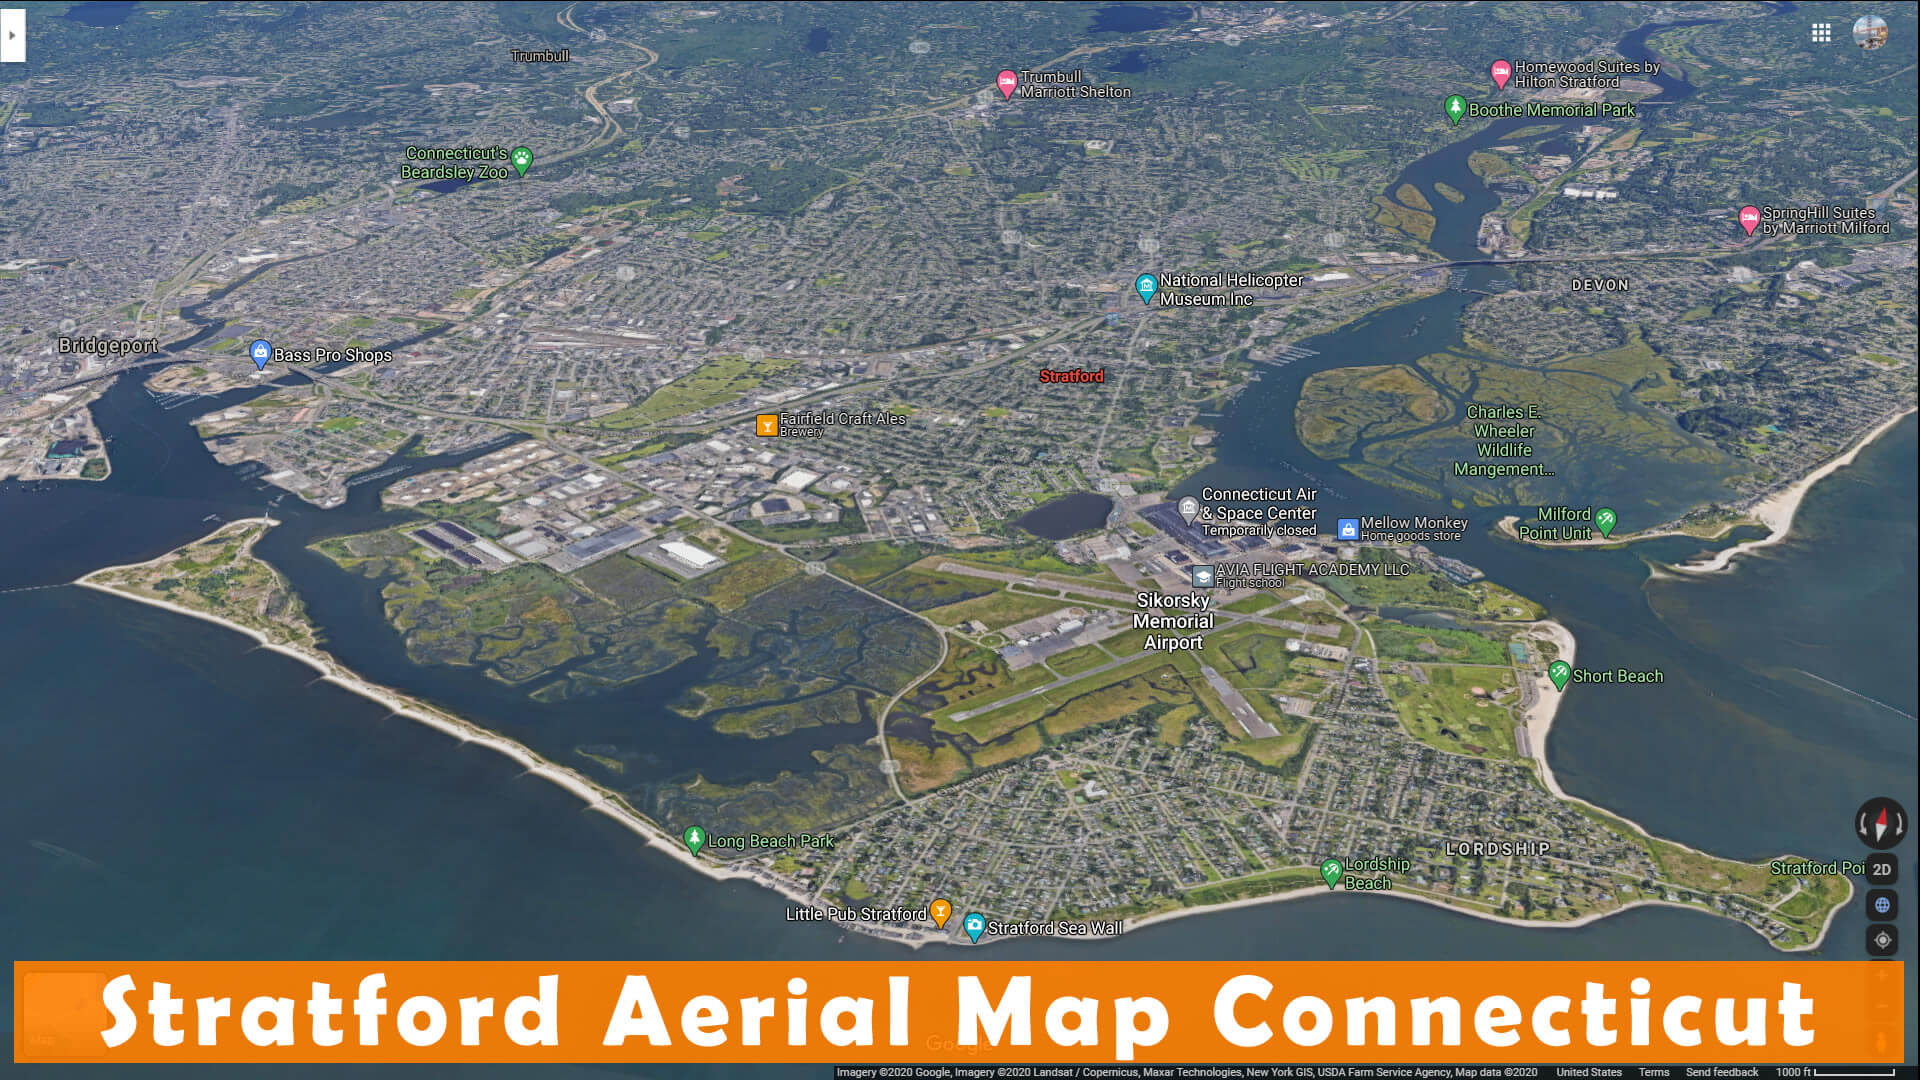 Stratford Aerial Map Connecticut